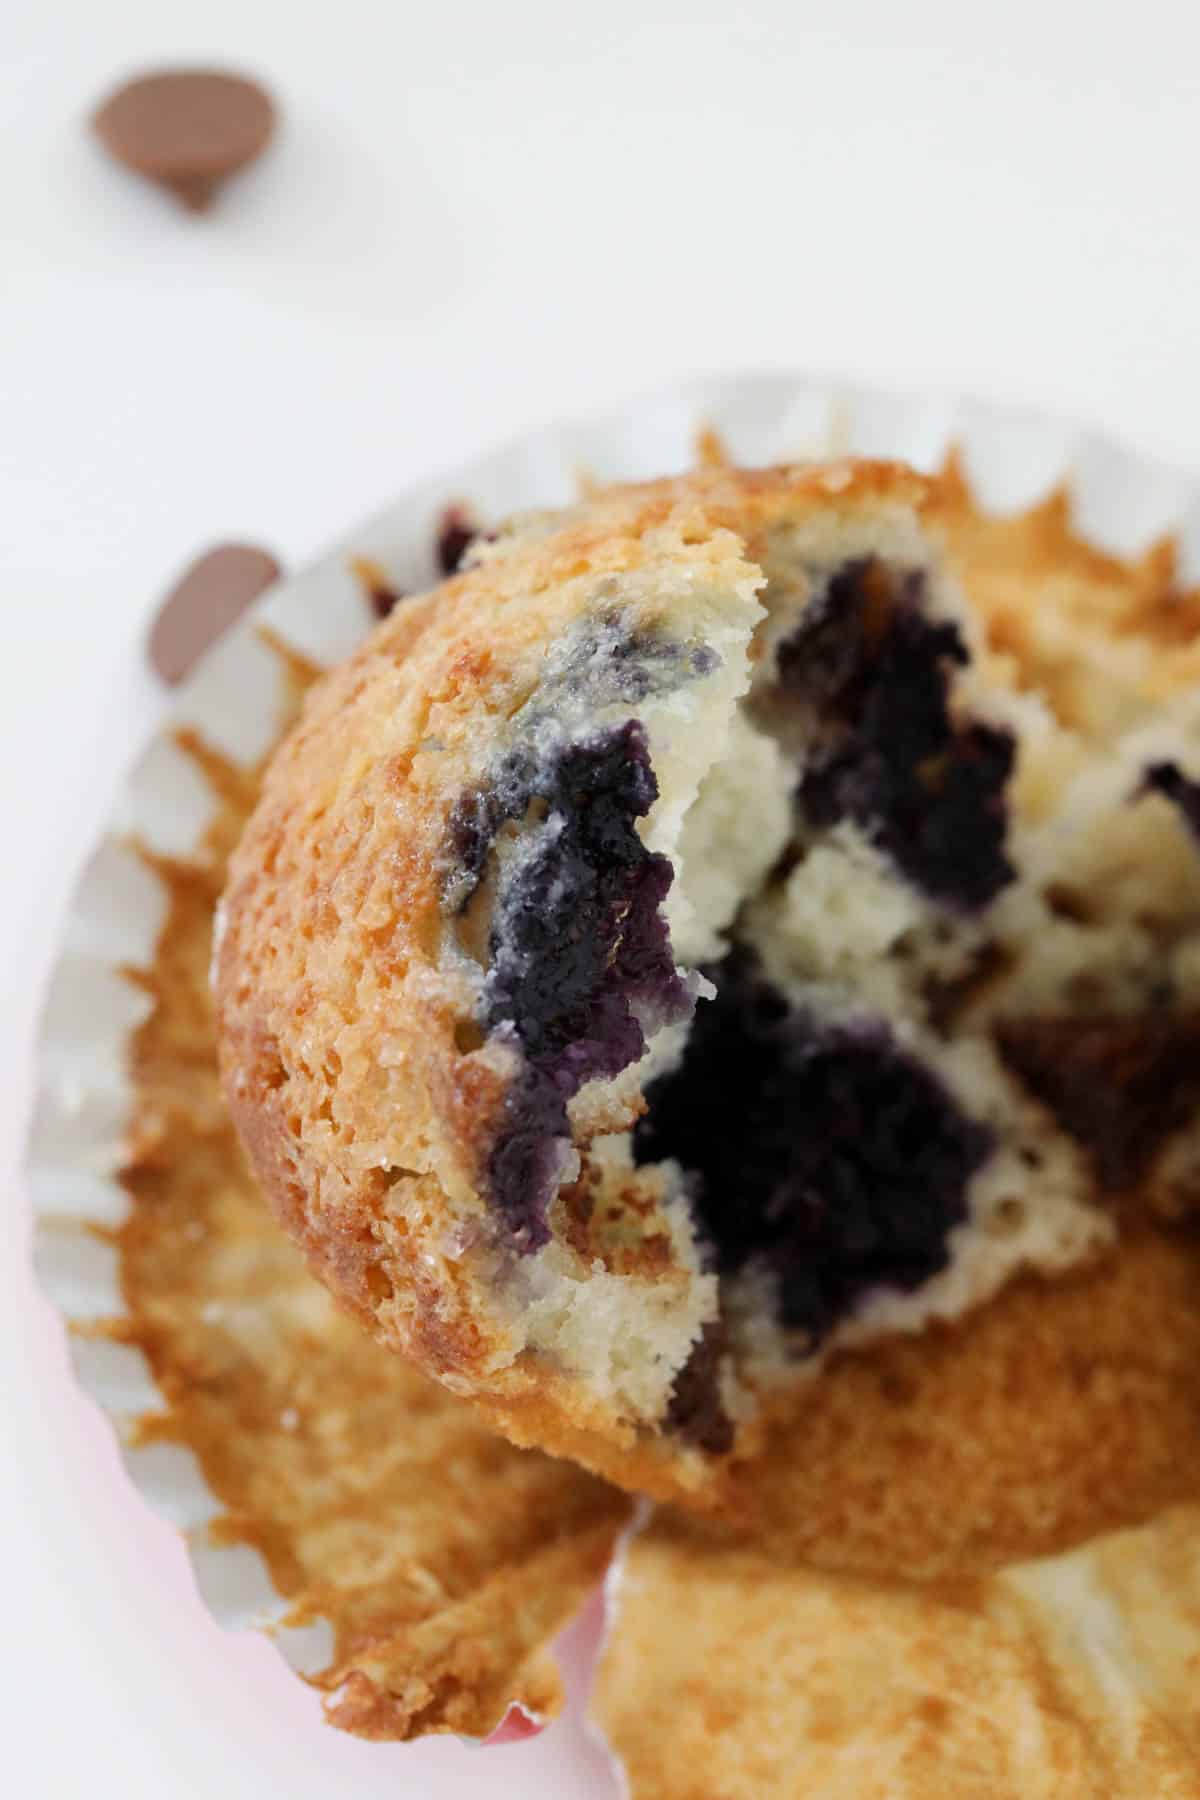 A close up of a half eaten blueberry chocolate chip muffin.